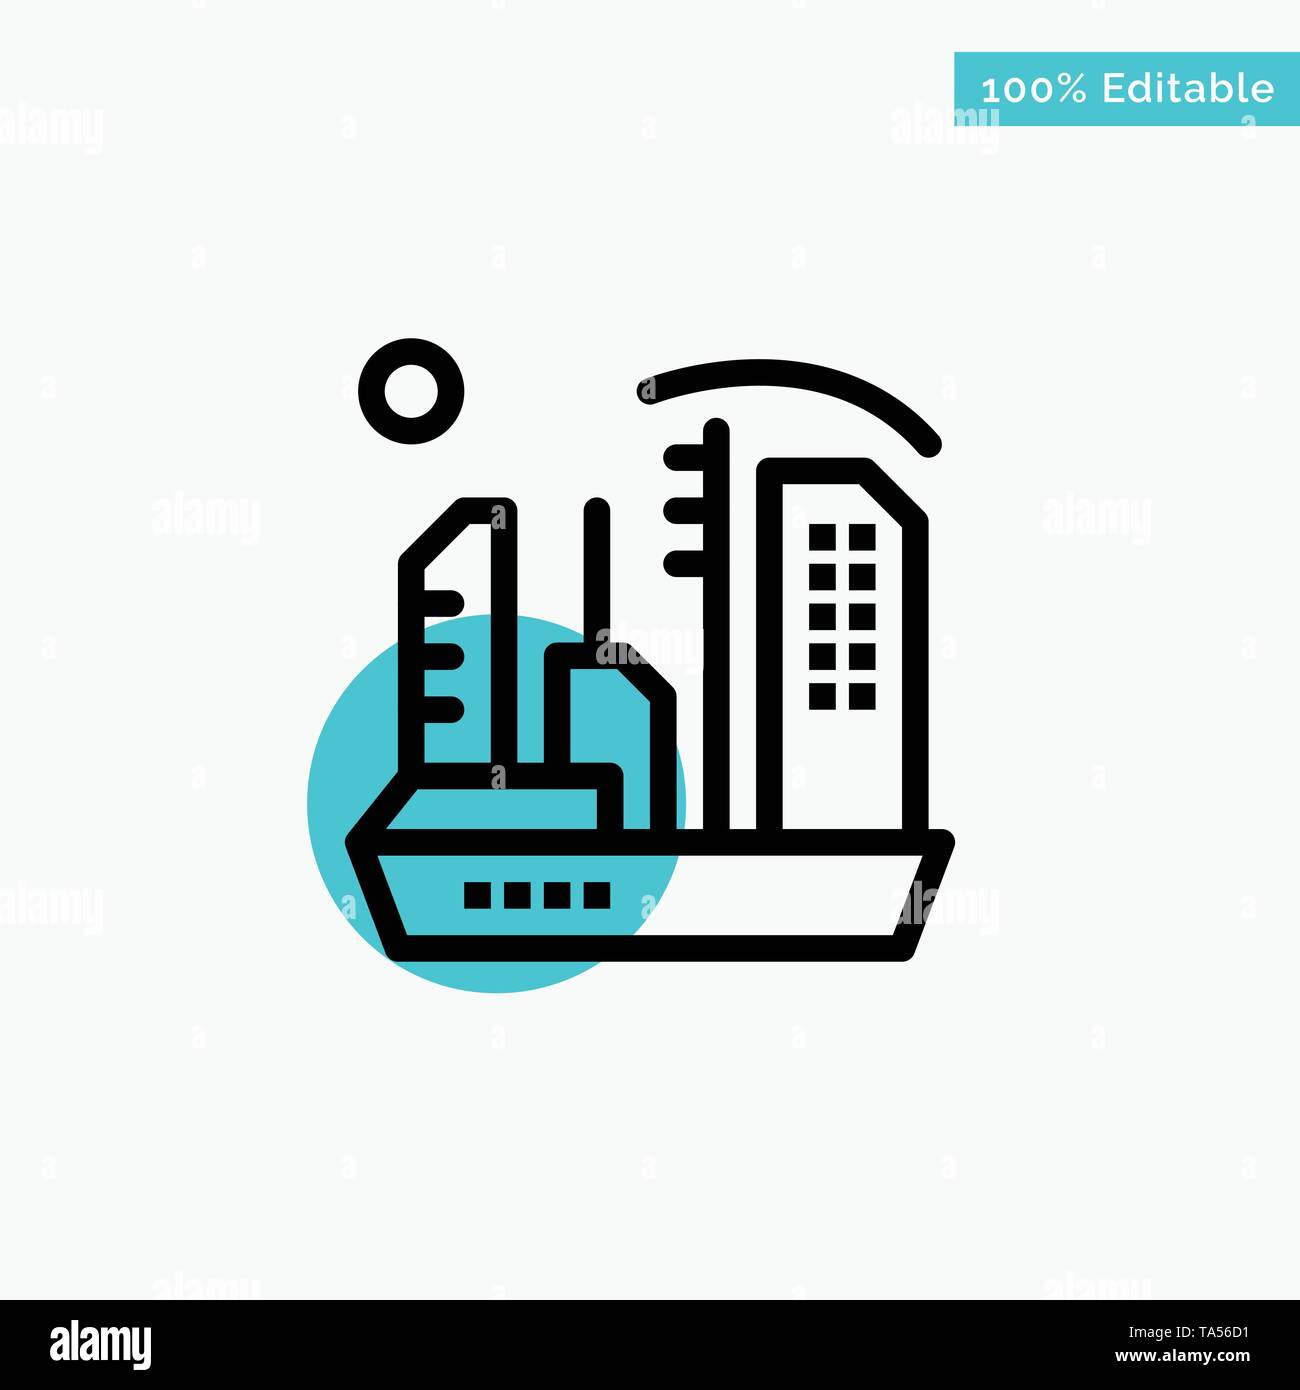 City, Colonization, Colony, Dome, Expansion turquoise highlight circle point Vector icon Stock Vector